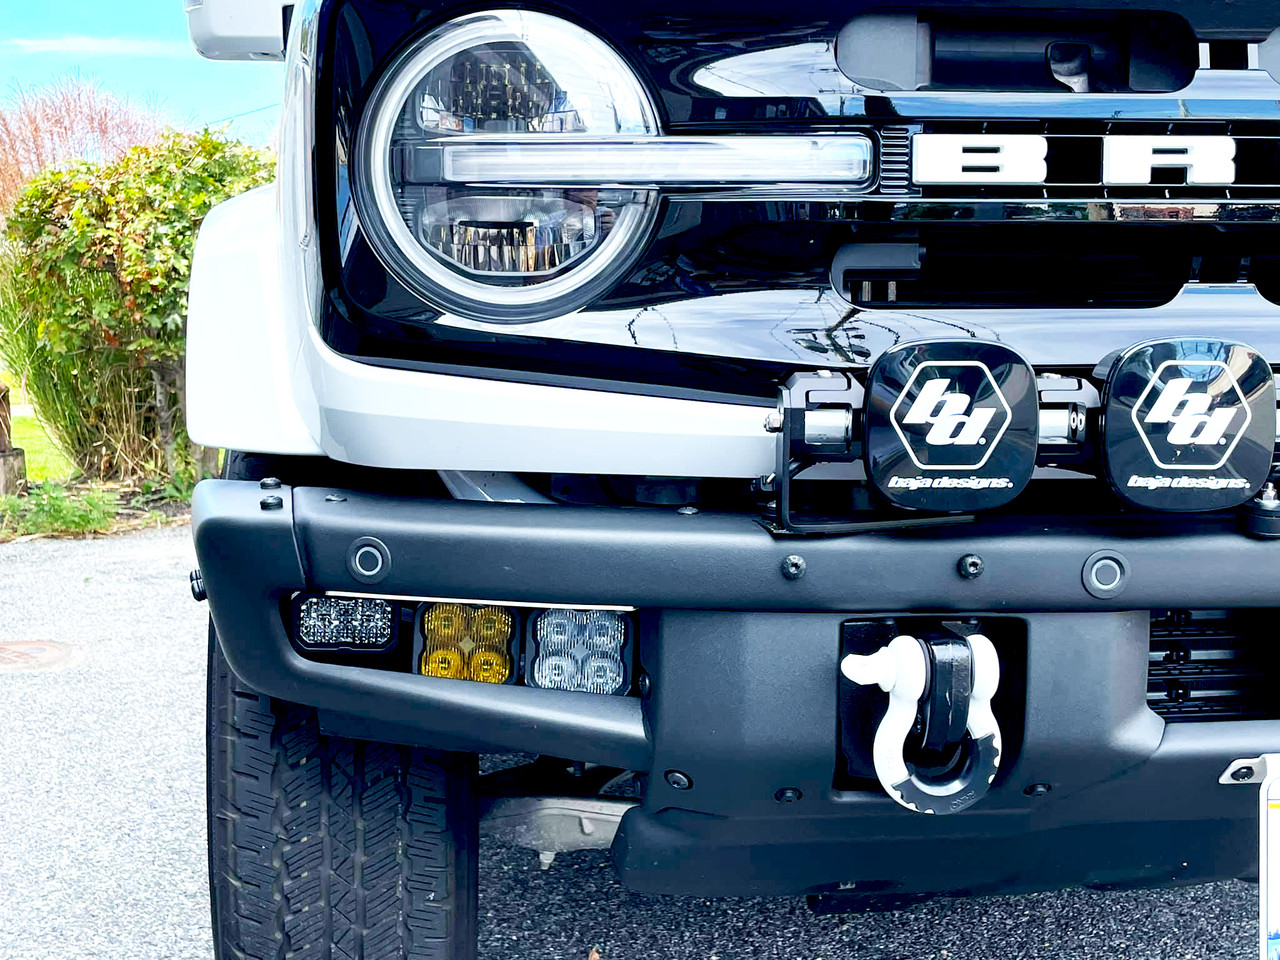 Ford Bronco Looking for good fog light option for modular bumper with yellow & white options 1706478337738